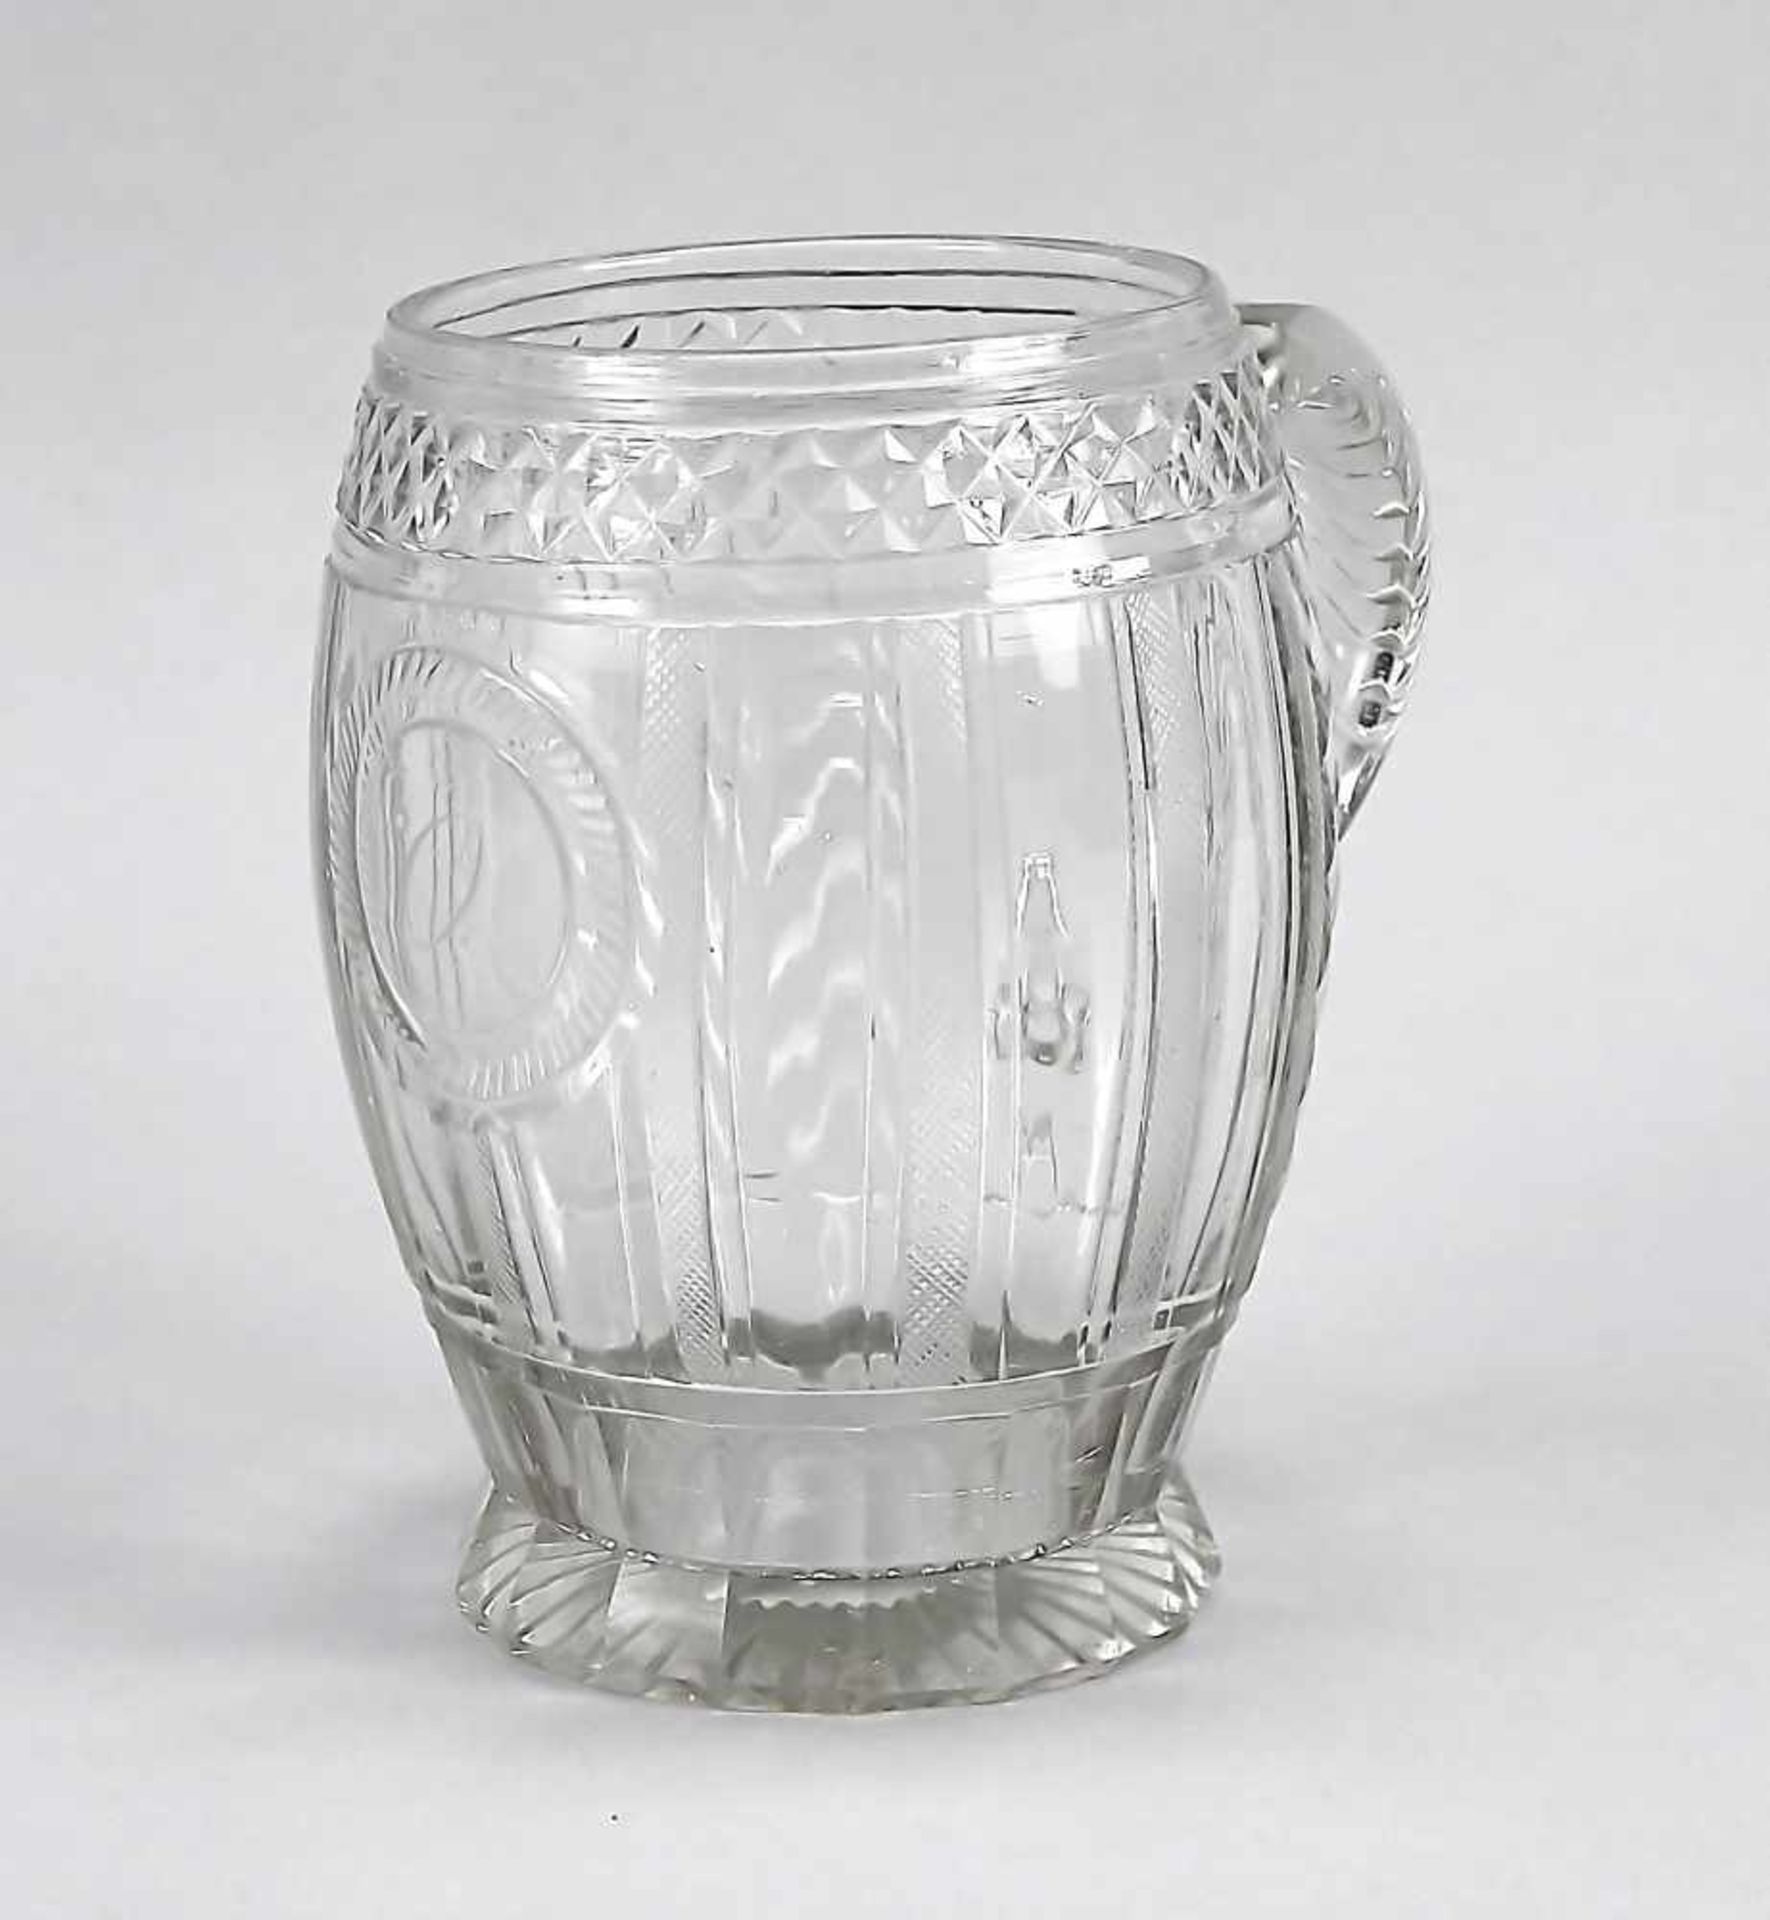 Large tankard, 19th century, polygonal stand, body in barrel form, sidely attached handle,clear